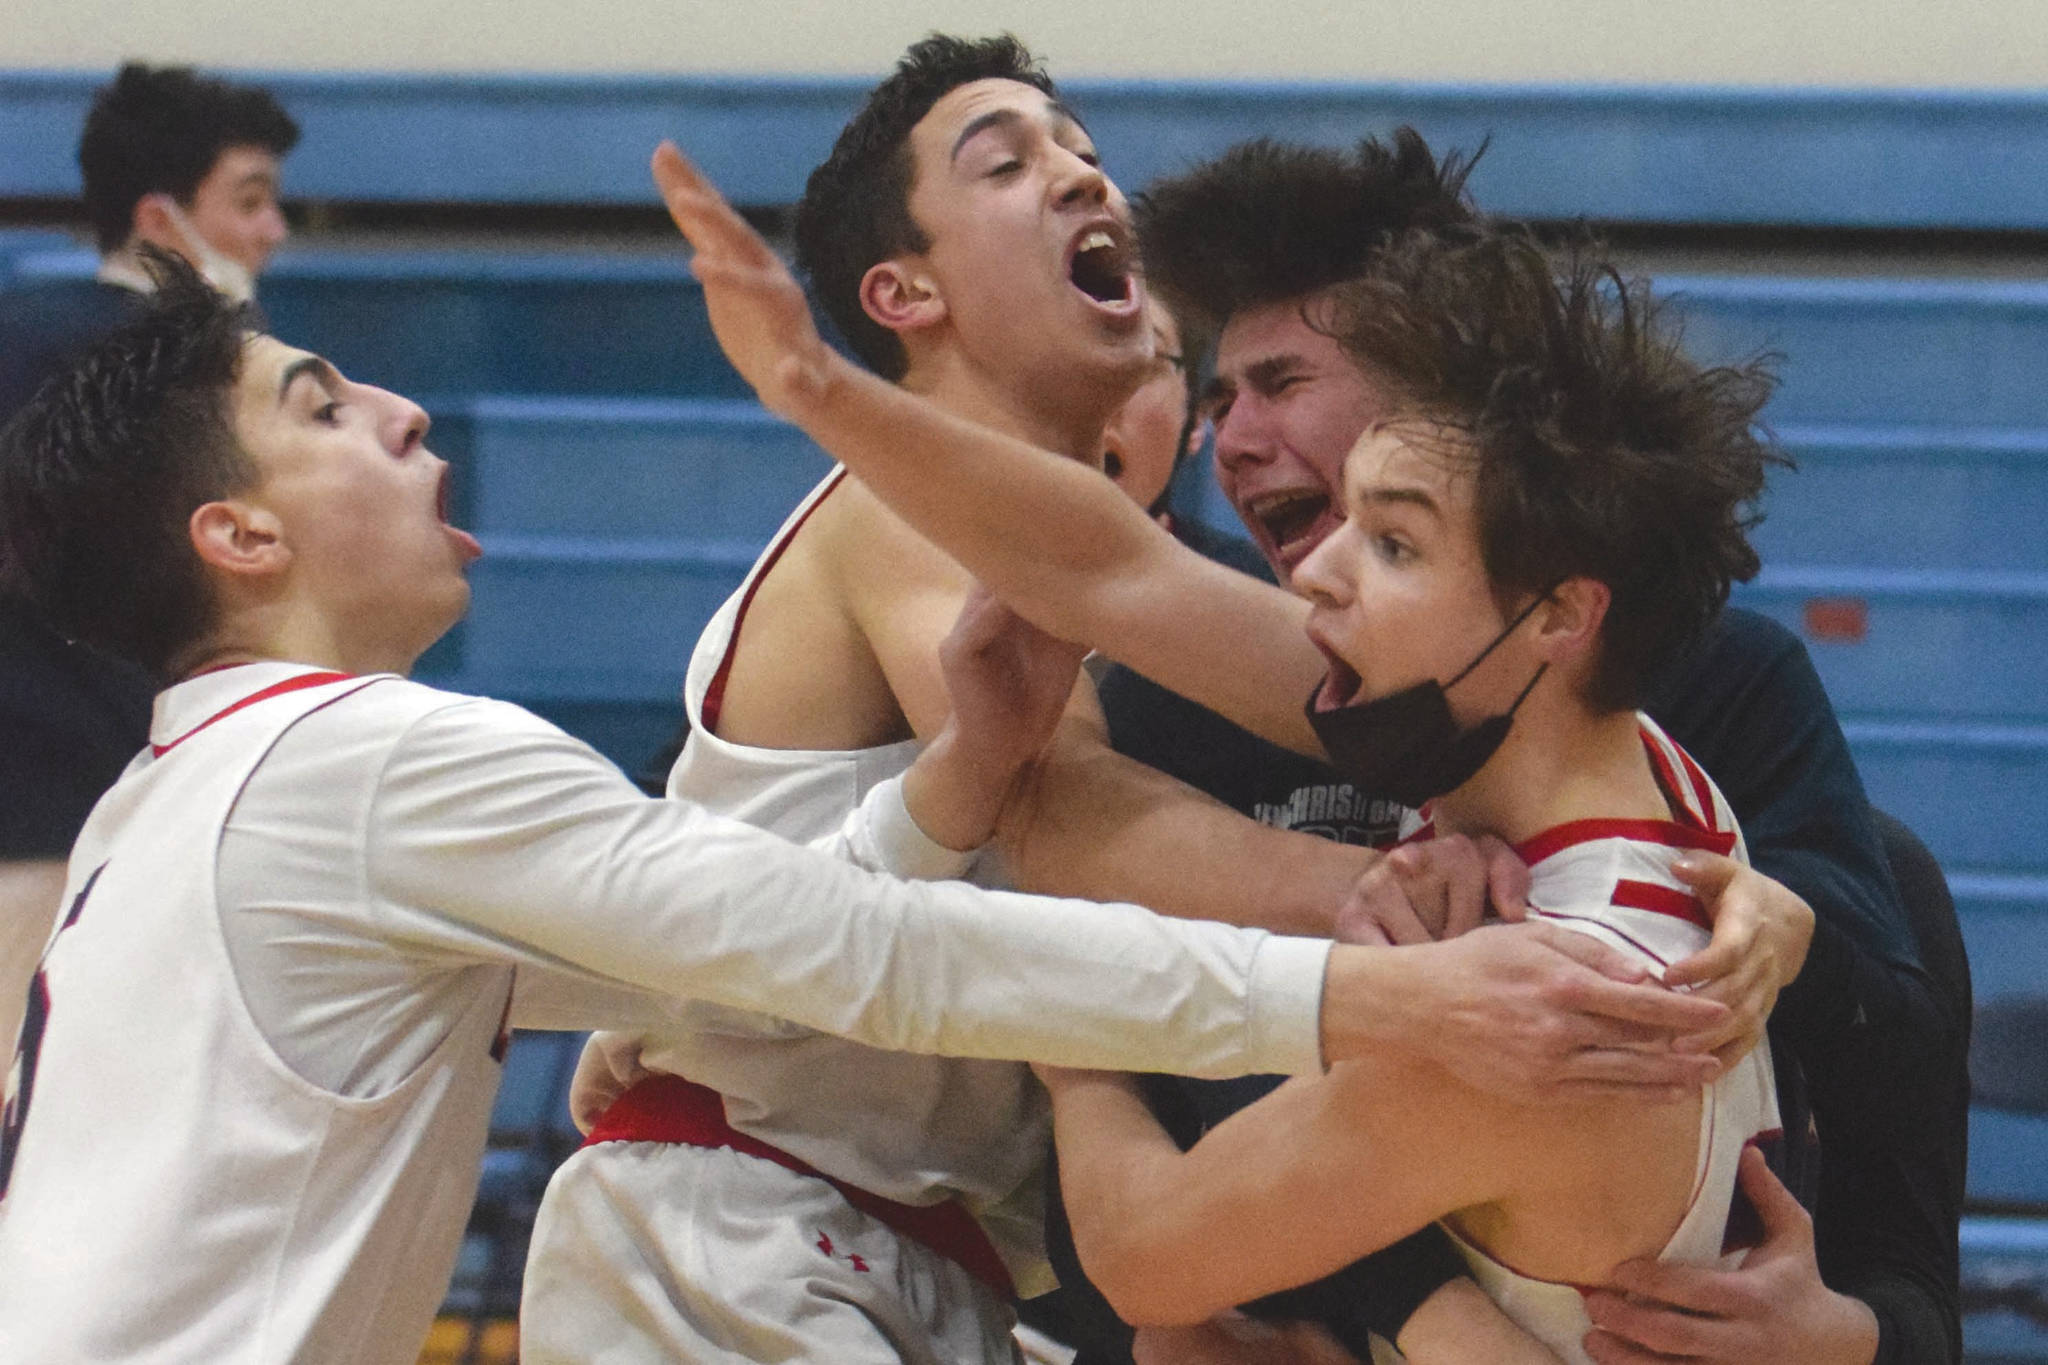 Lumen Christi's Brenden Gregory is mobbed by teammates after hitting the game-winning 3-pointer in the Peninsula Conference championship game against Ninilchik on Friday, March 19, 2021, at Soldotna High School in Soldotna, Alaska. (Photo by Jeff Helminiak/Peninsula Clarion)